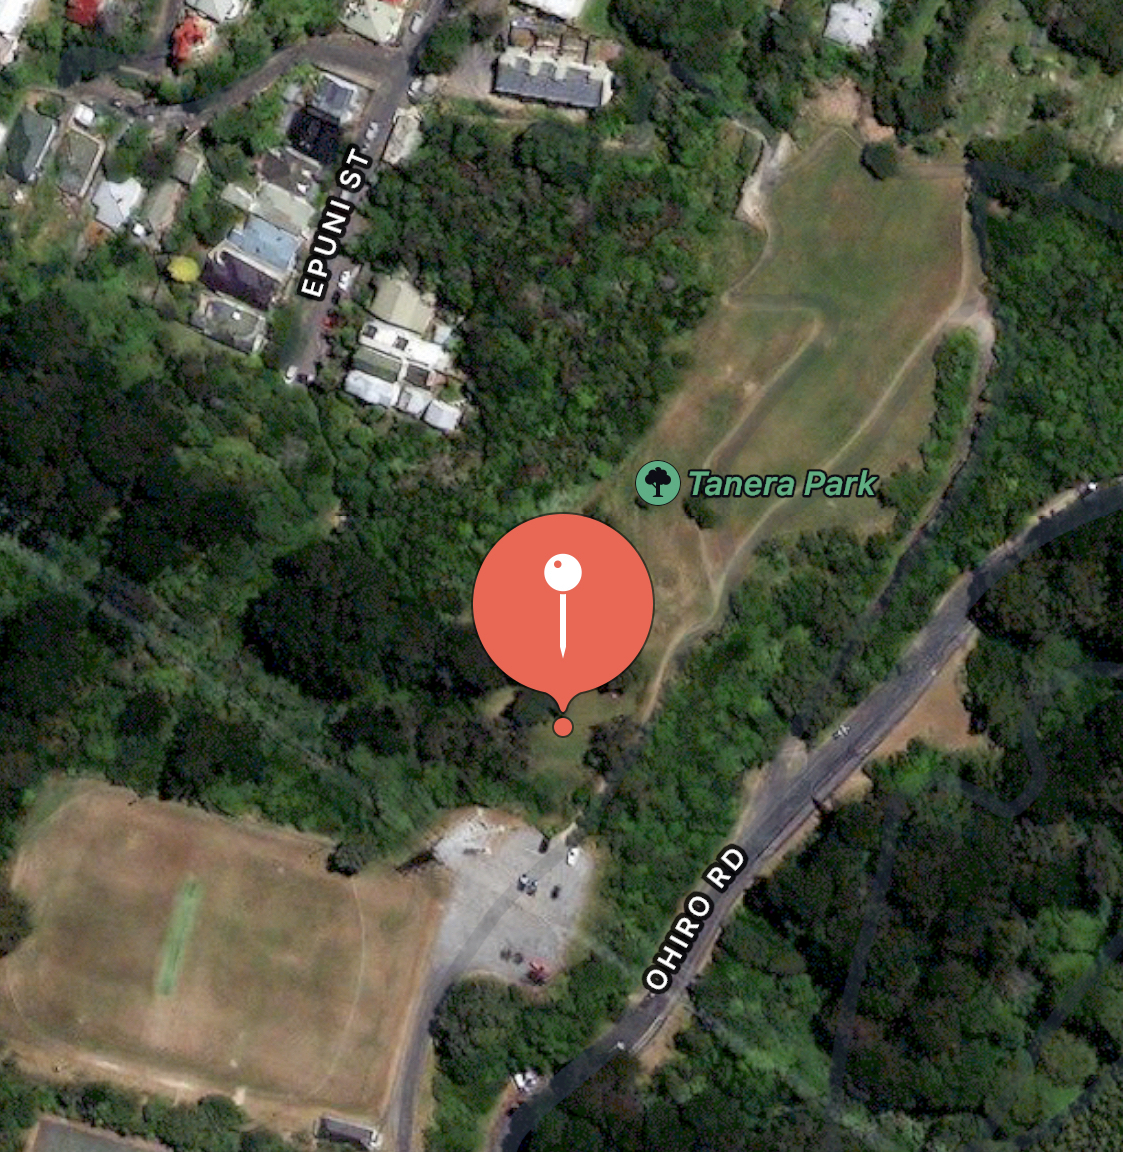 A map with a pin showing the location of the event just north of the Tanera carpark.